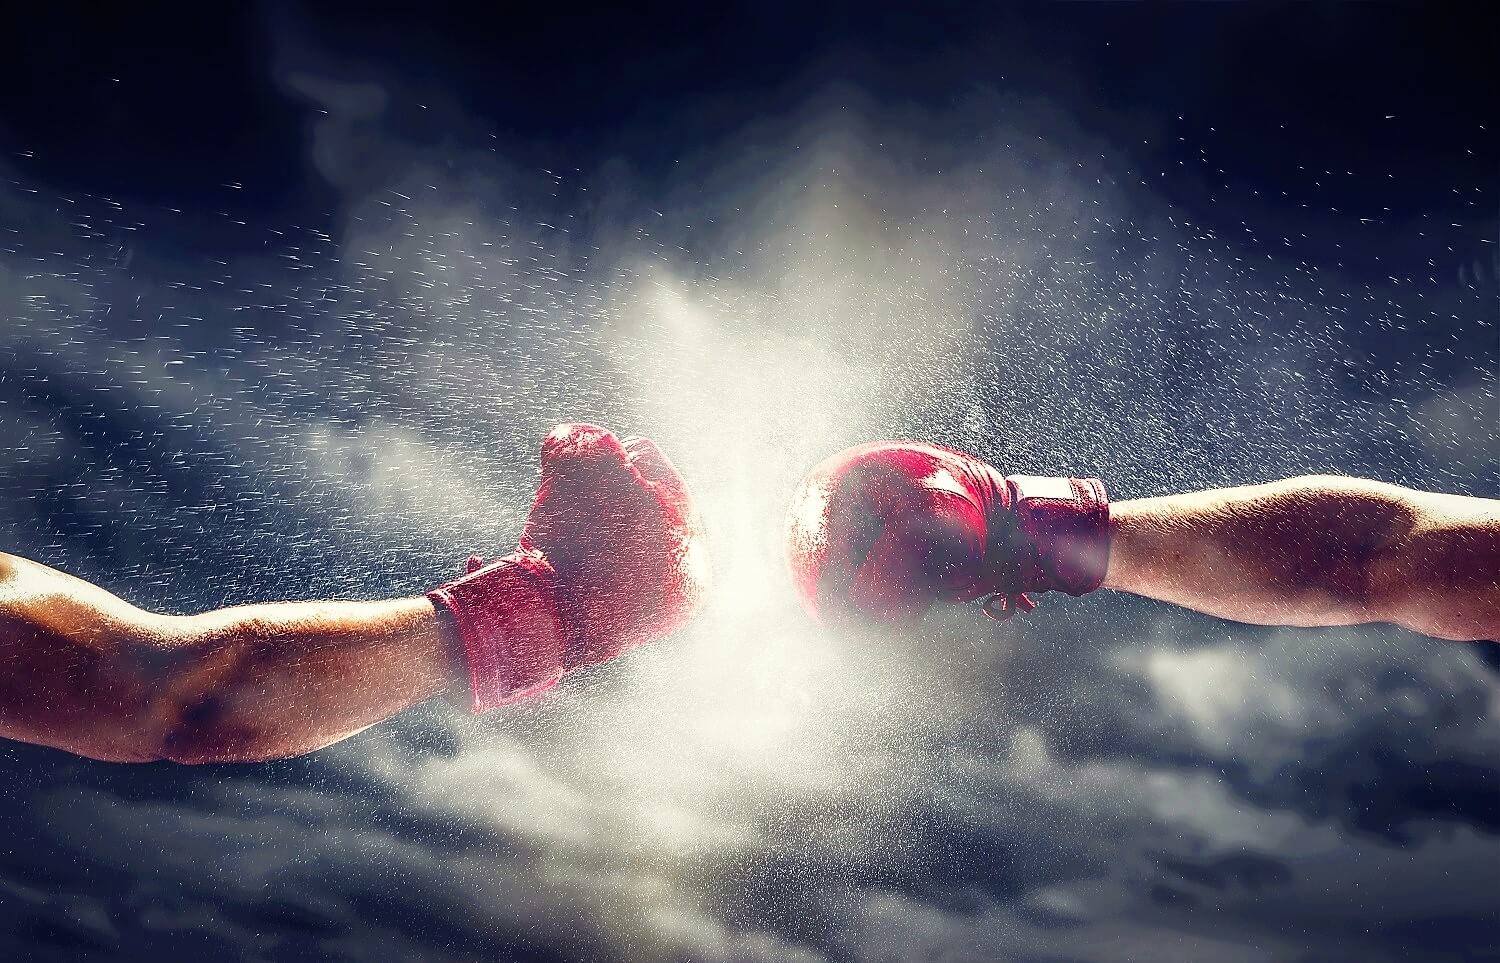 #Tether Joins Hands with INHOPE to Fight CSAM, Mango Labs Sues Exploiter, ‘UK Must Move Faster’ on Crypto Regulation #USa #Miami #Nyc #Uk #Es #Crypto Coin